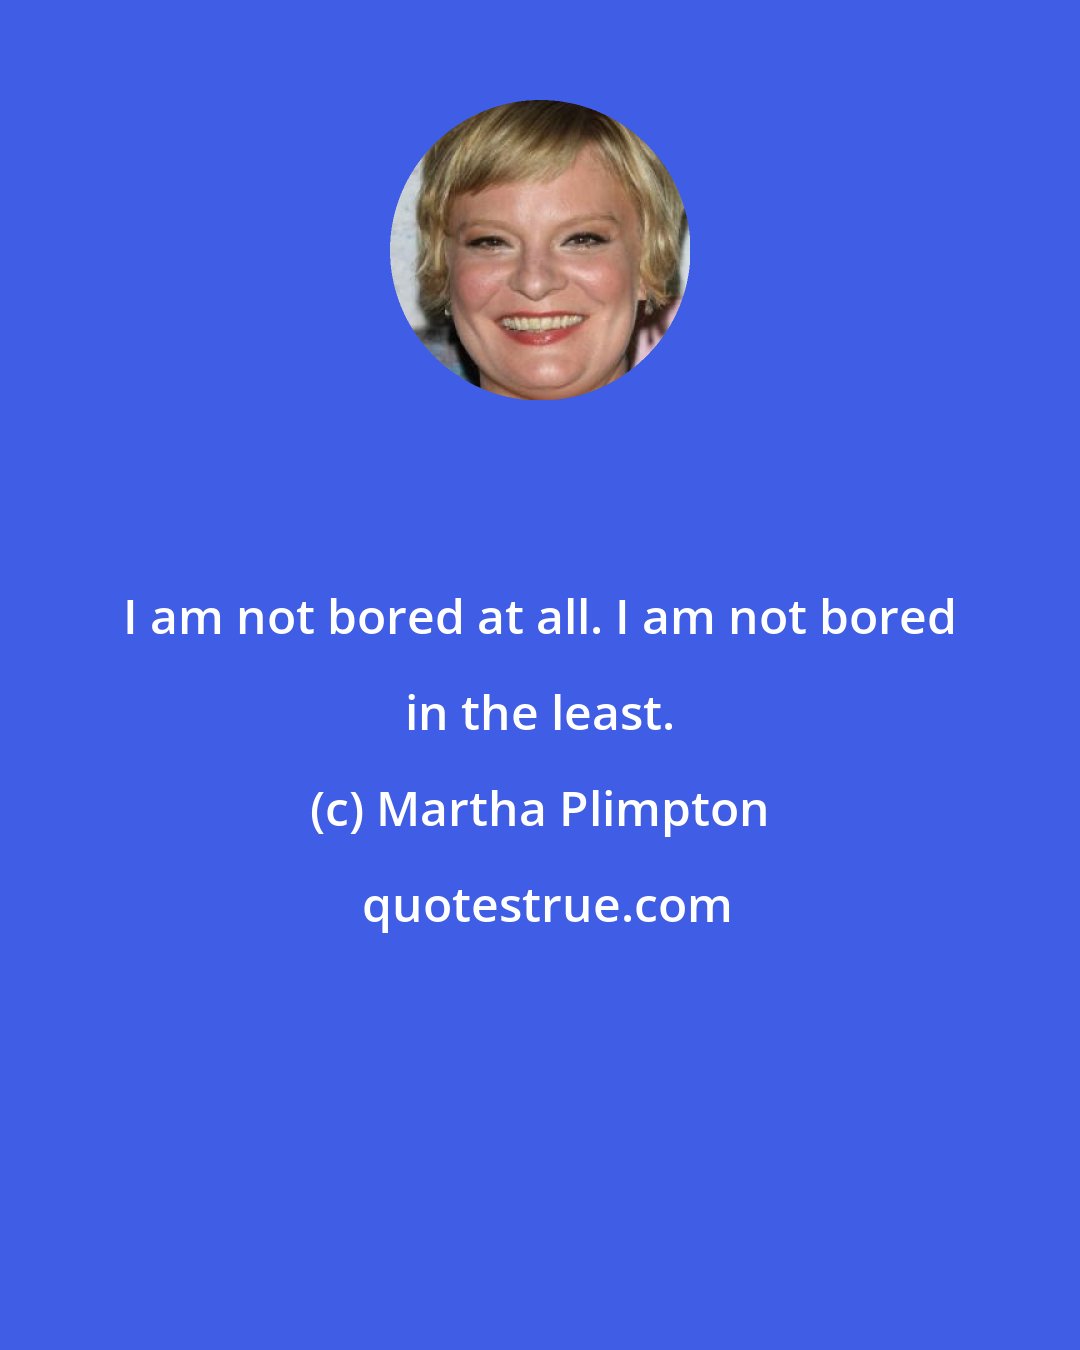 Martha Plimpton: I am not bored at all. I am not bored in the least.